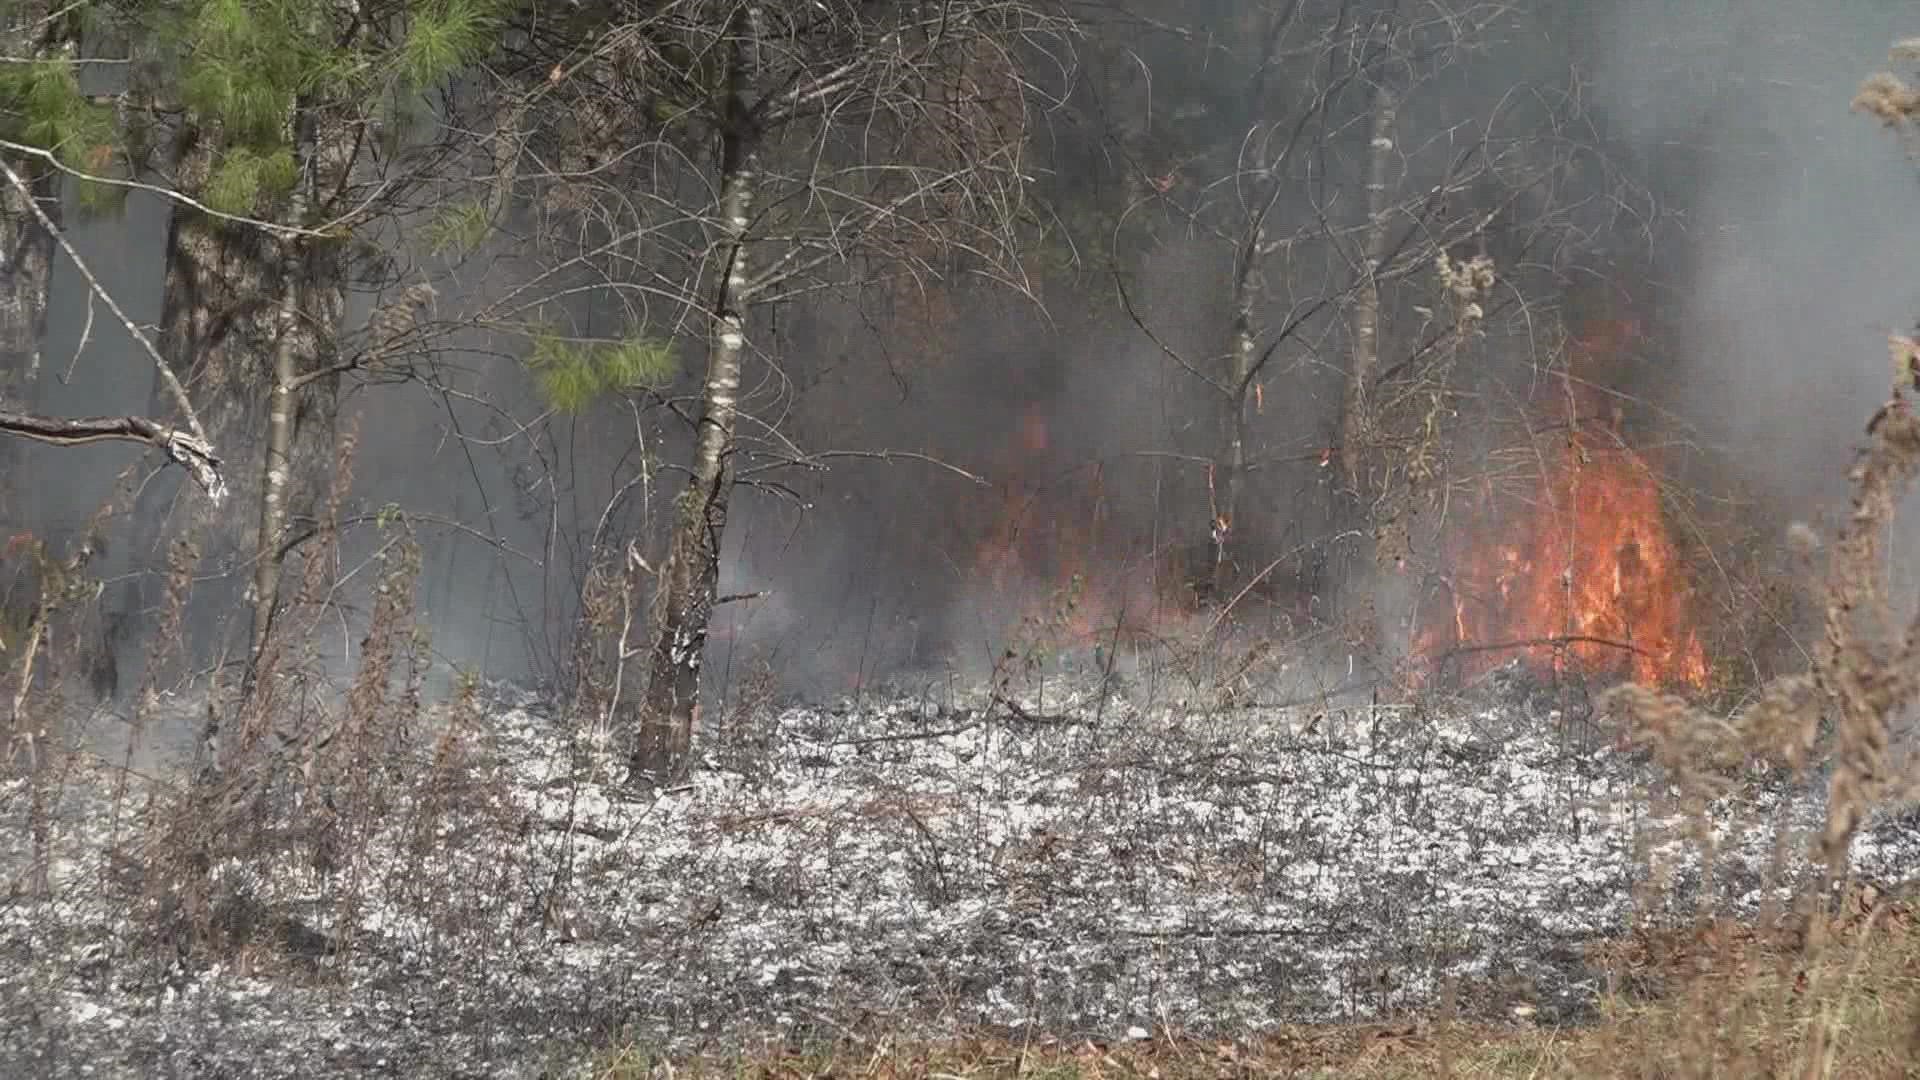 We can expect to see smoke and fire this month in Cades Cove. Rangers are setting those controlled fires in an effort to improve habitat and prevent wildfires.